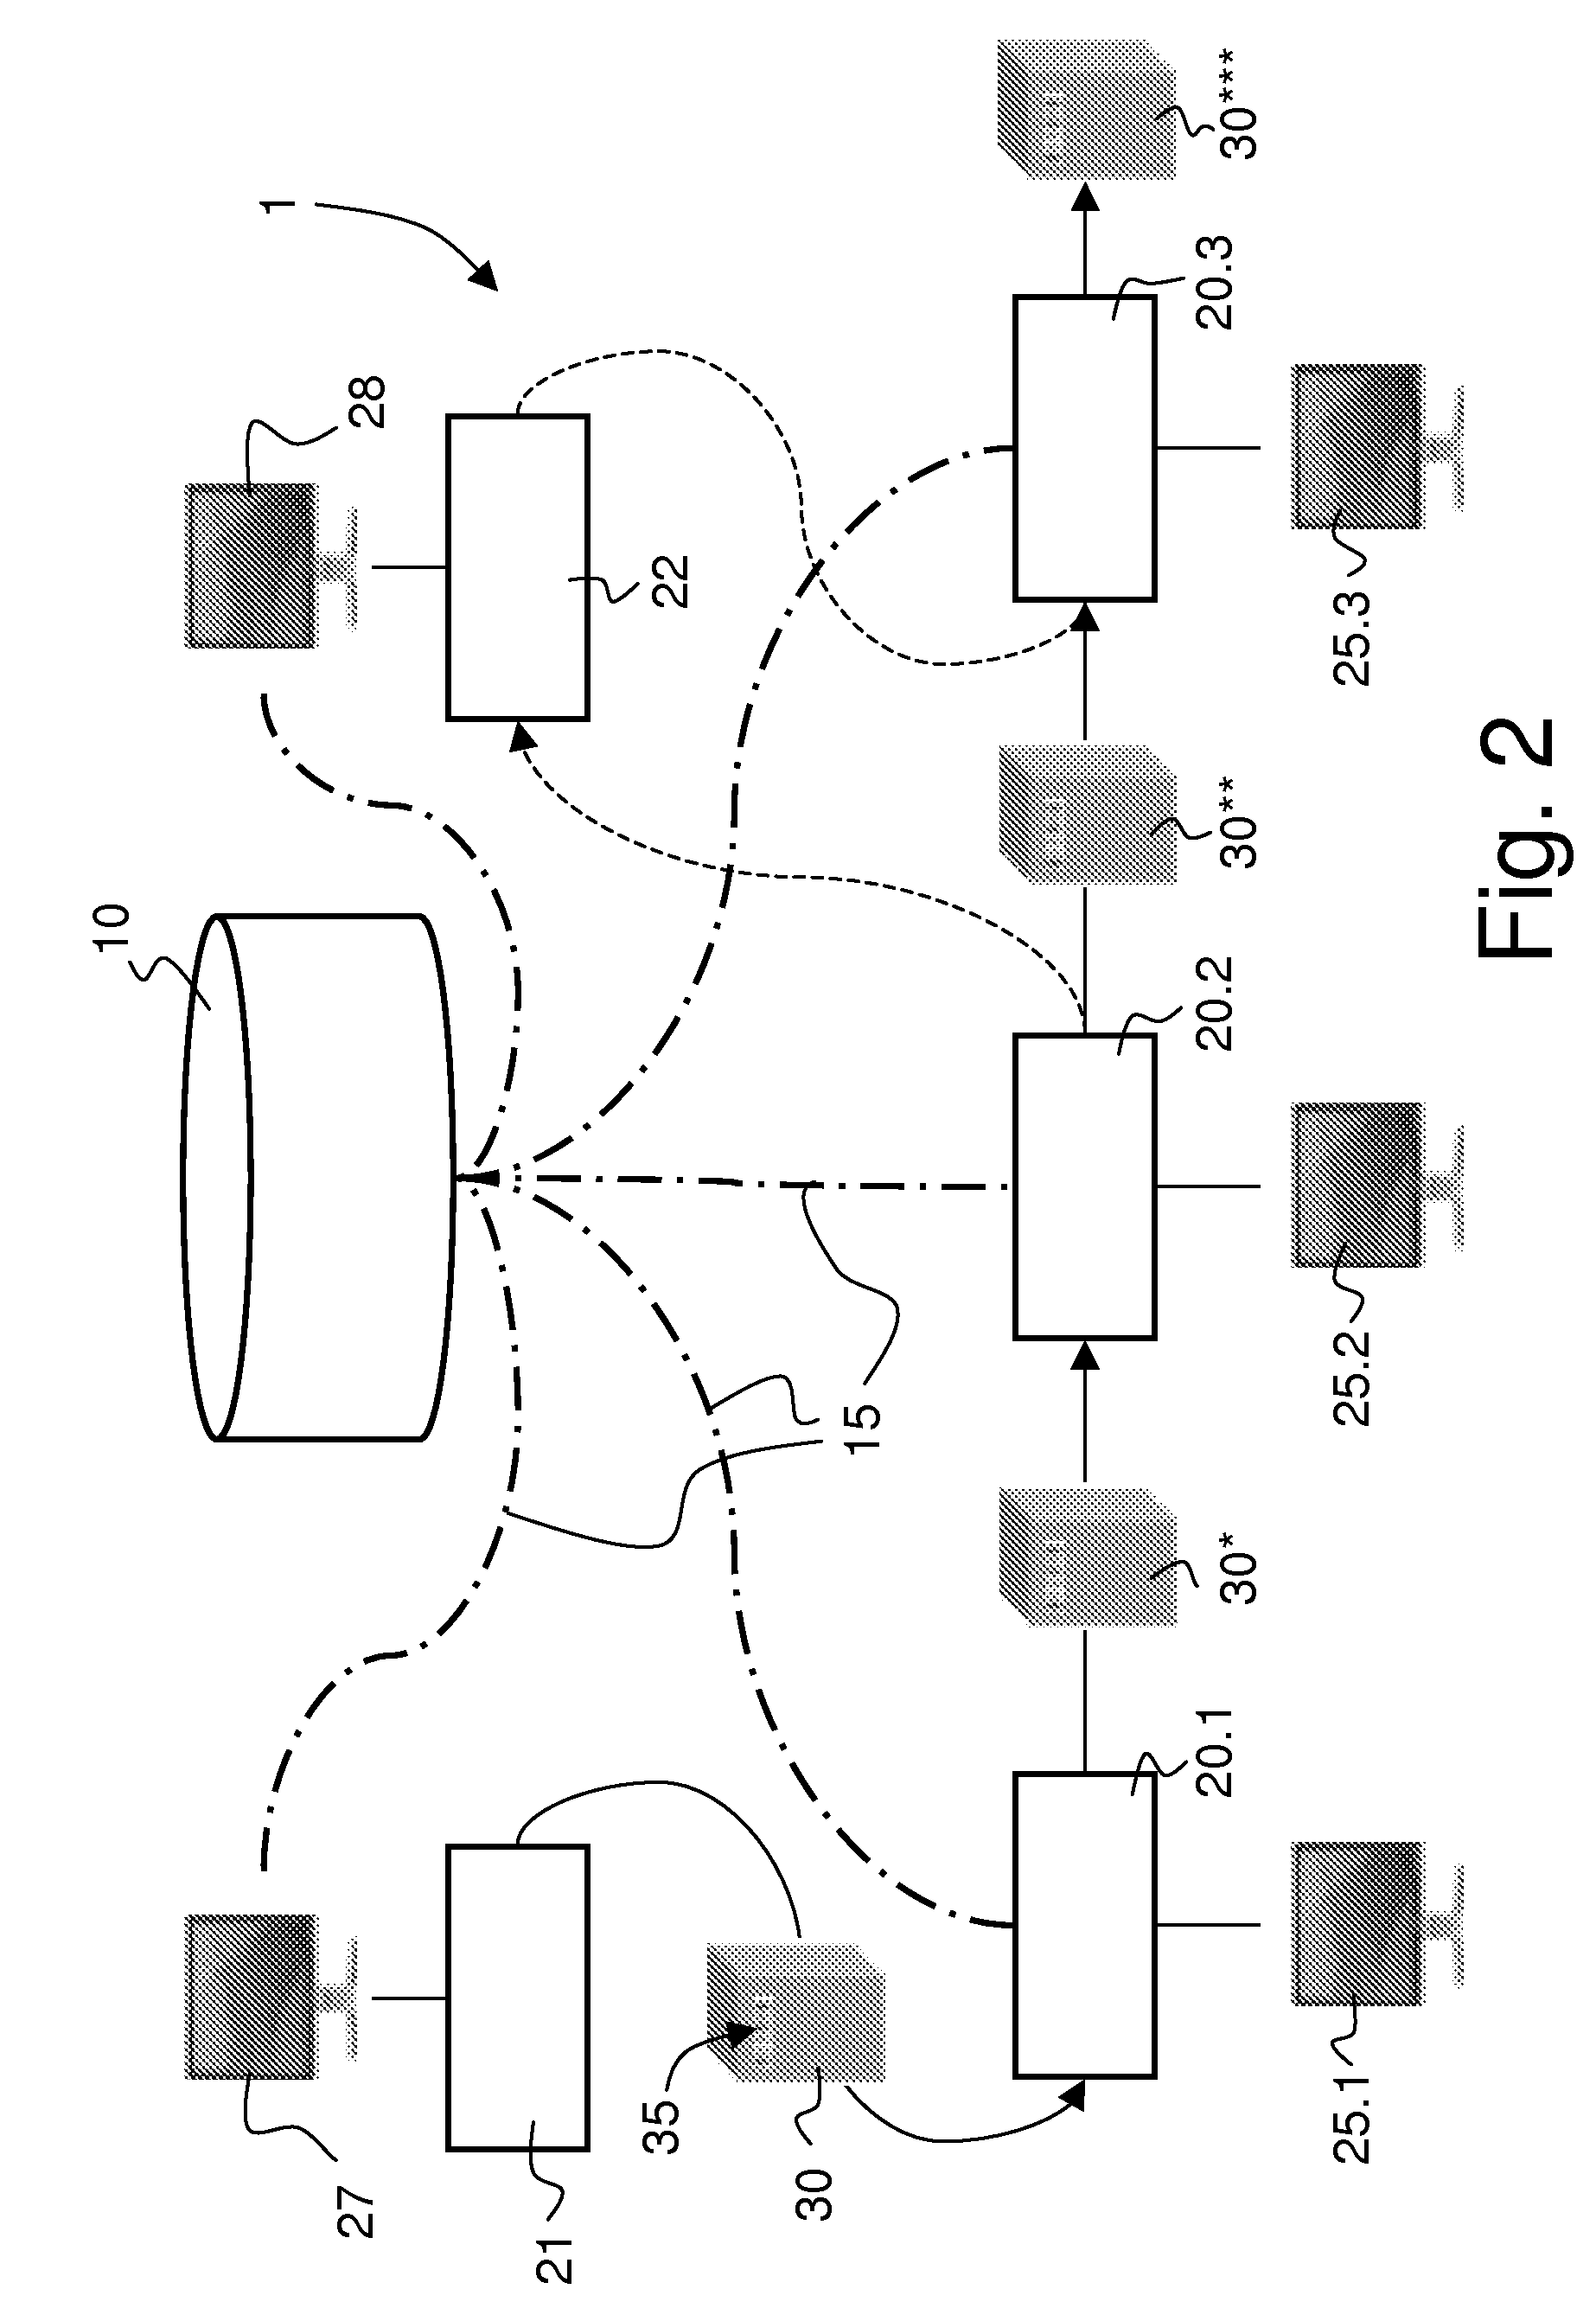 Method and system for controlled production of security documents, especially banknotes